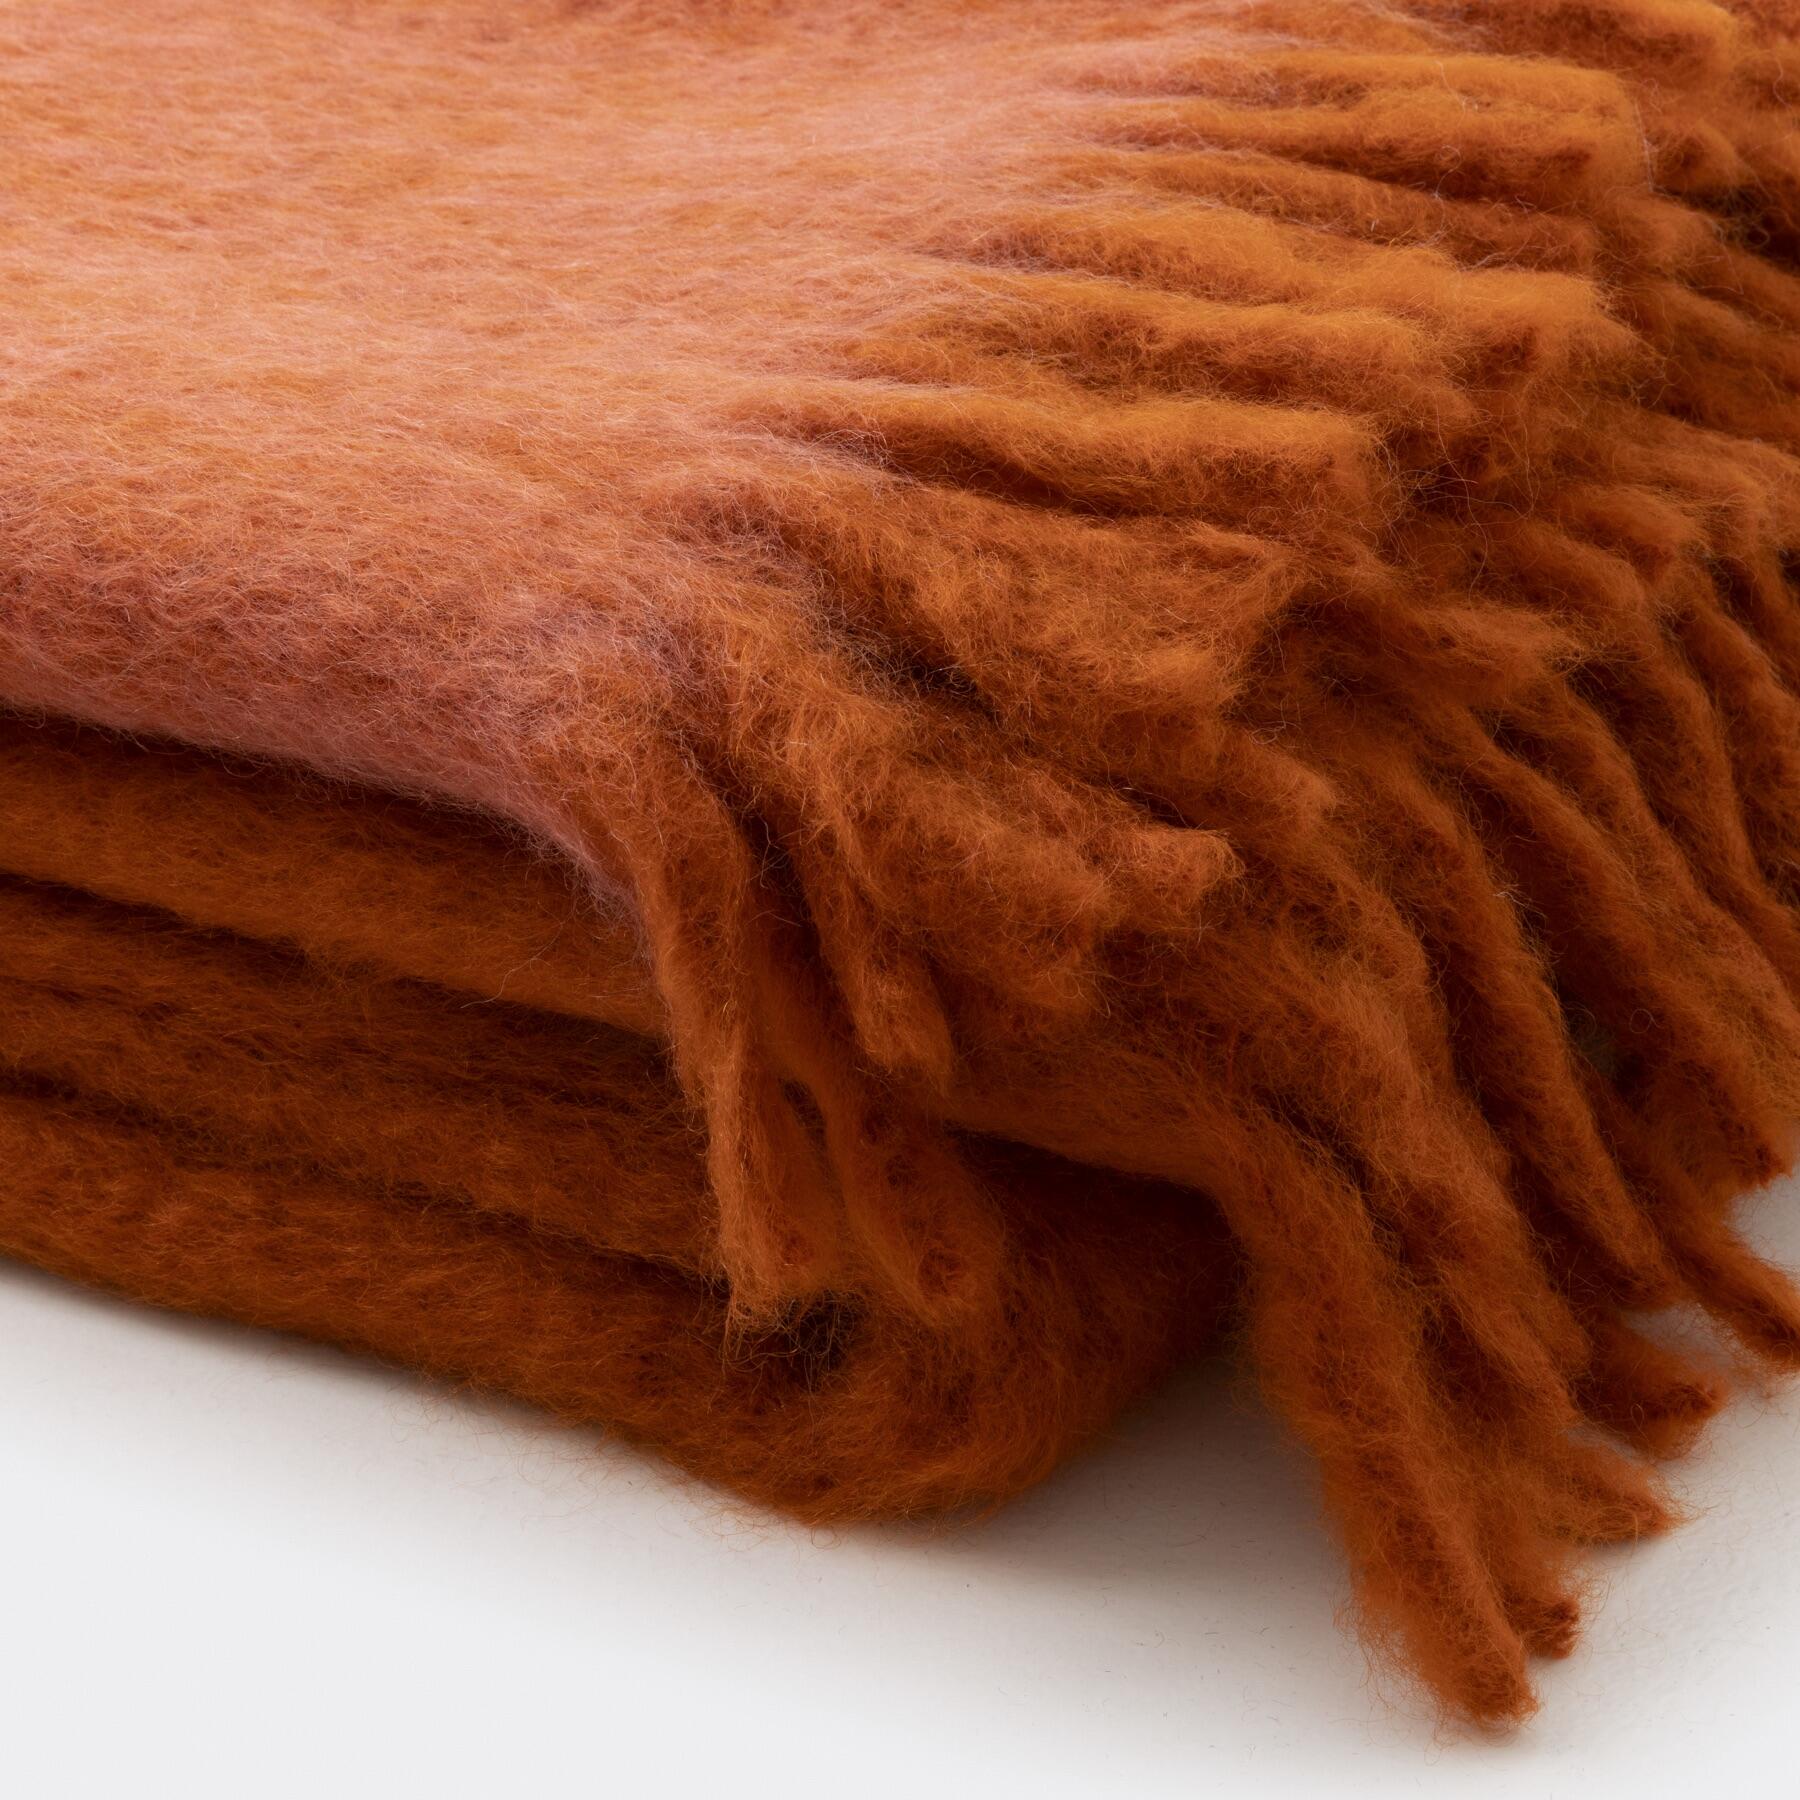 Mohair And Wool Throw, Suede Stitching, Orange